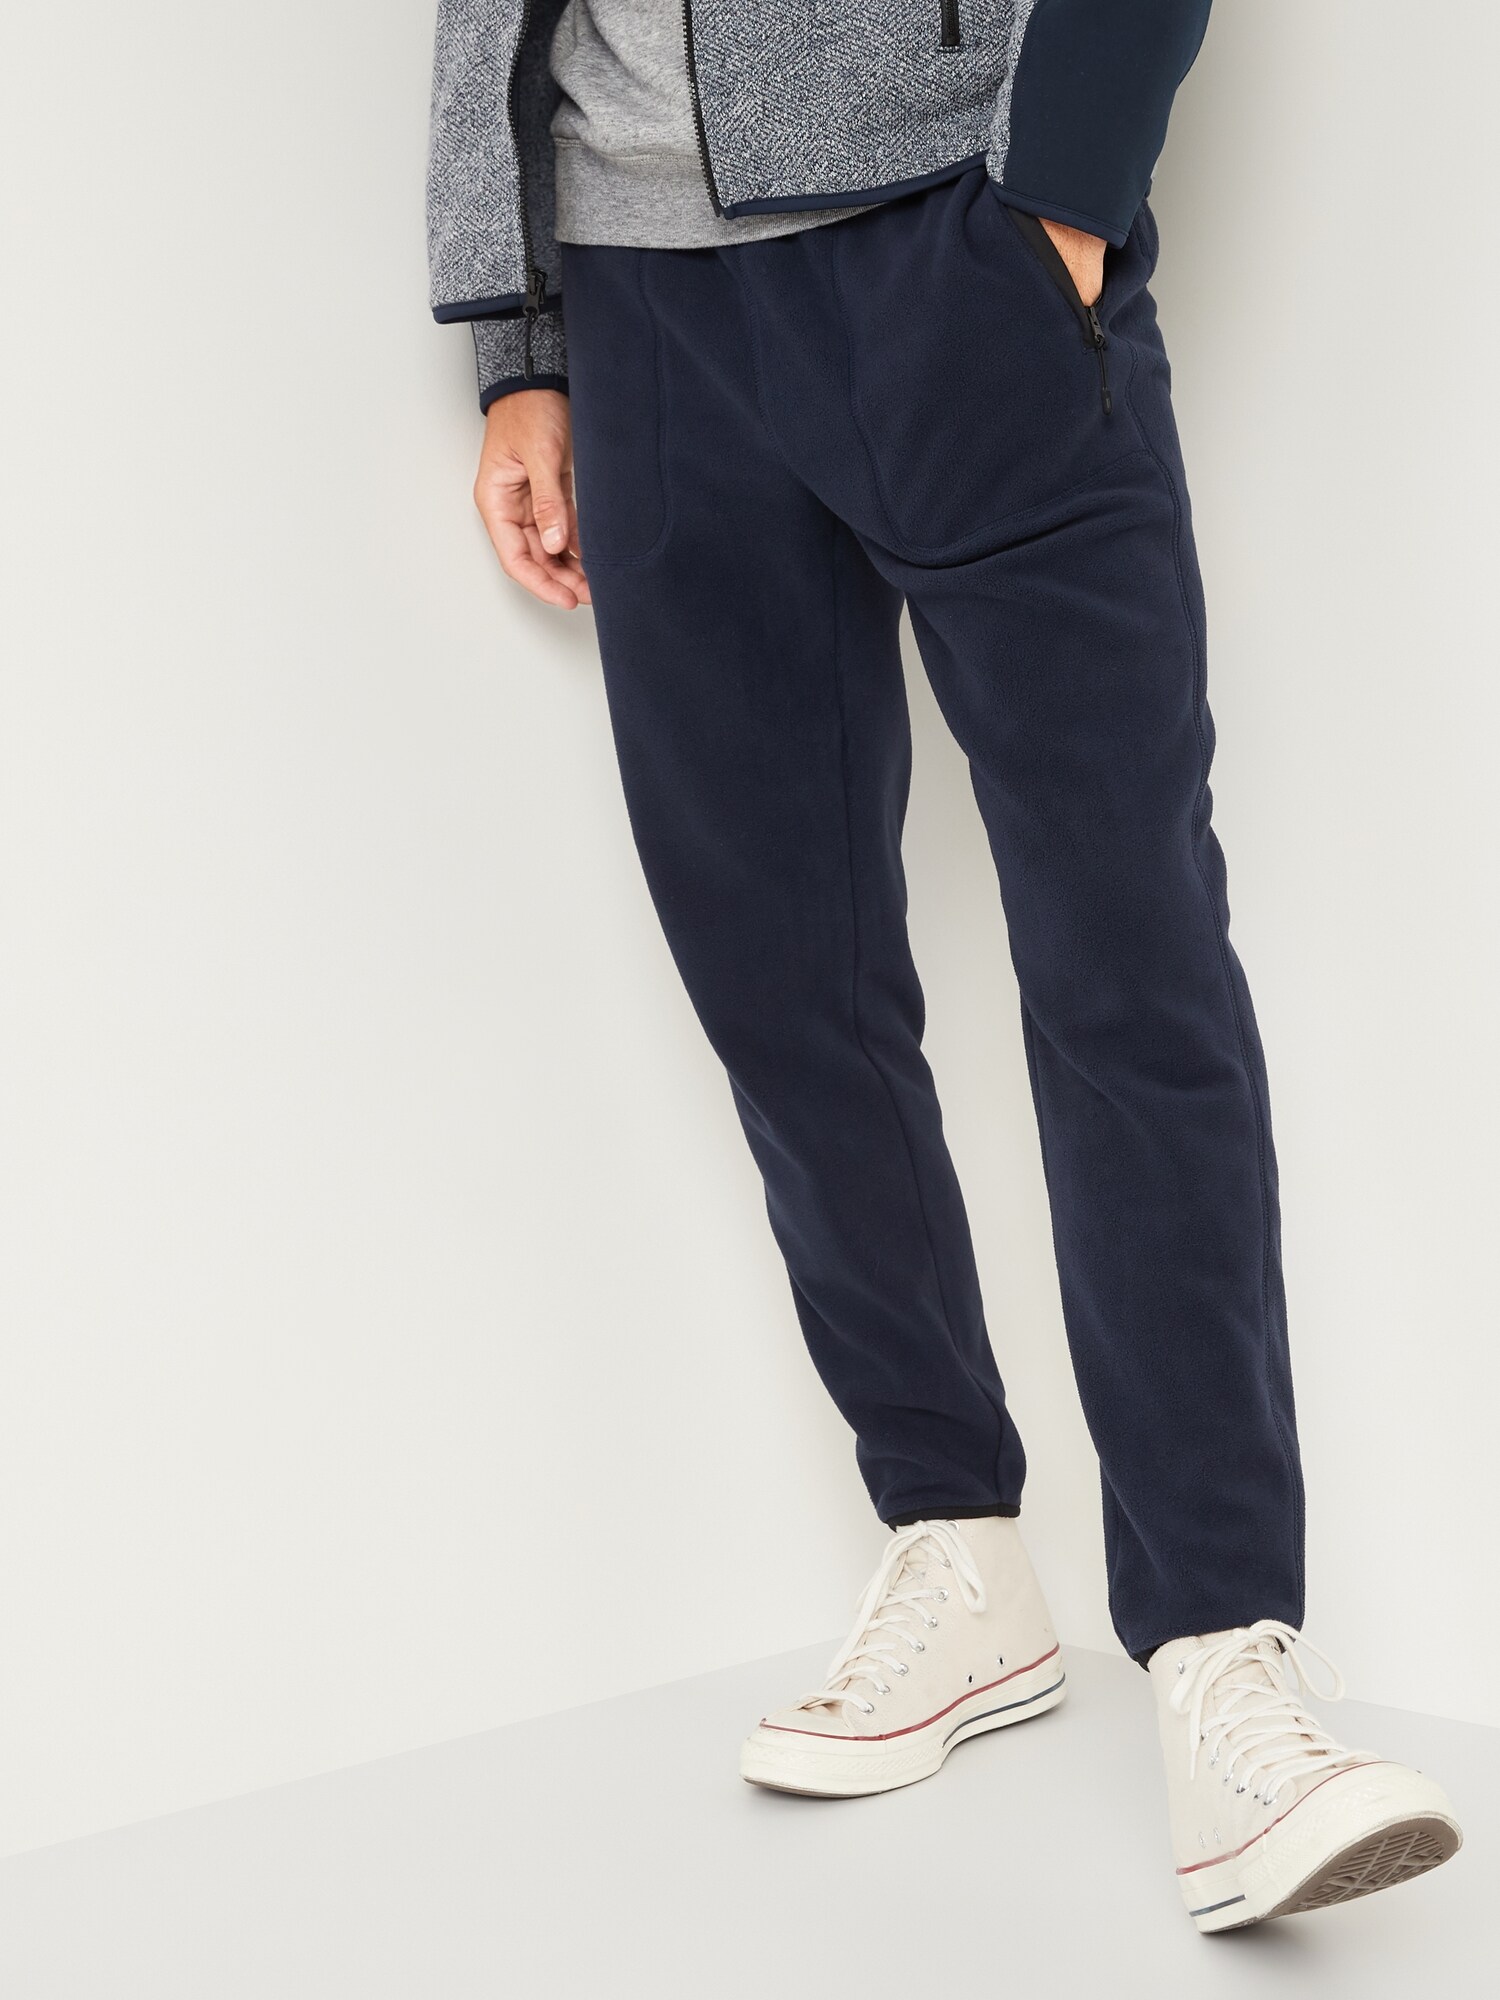 Go-Warm Micro Performance Fleece Gender-Neutral Sweatpants for Adults